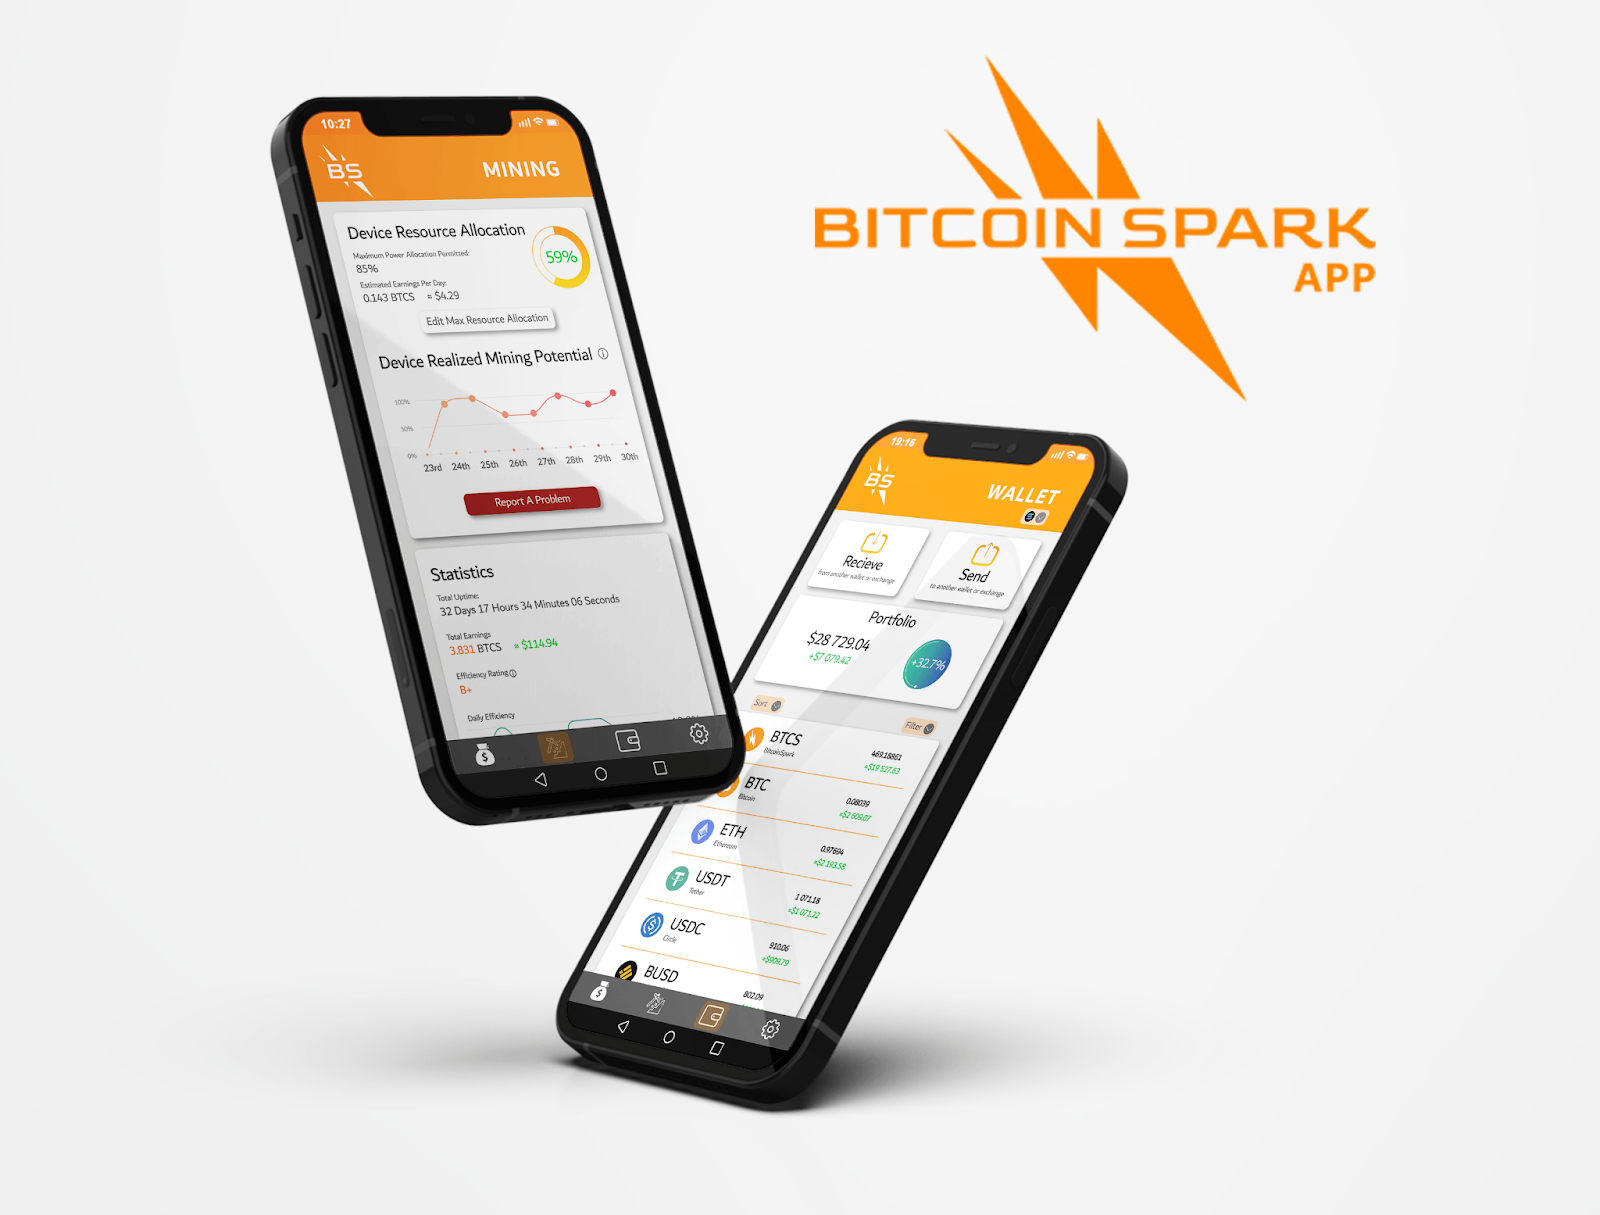 Quality Tech Makes Quality Profit, Bitcoin Spark Will Supersede Bitcoin